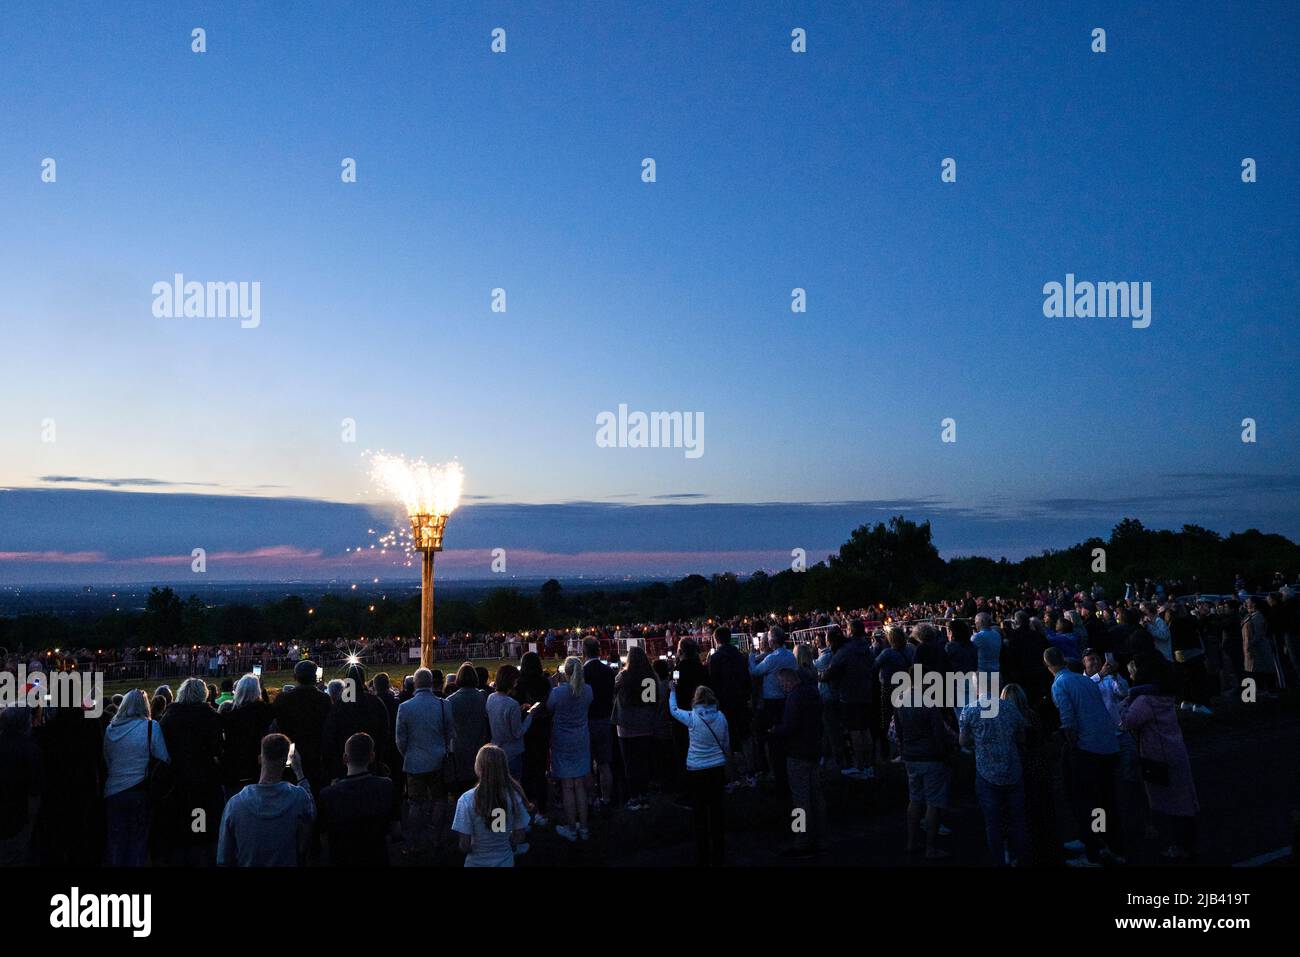 Epsom Downs, Surrey, UK, 2nd June 2022. The Platinum Jubilee beacon is lit at 9.45pm to celebrate 70 years of the reign of Queen Elizabeth the Second. This is one of several beacons lit simultaneously around the UK. Stock Photo